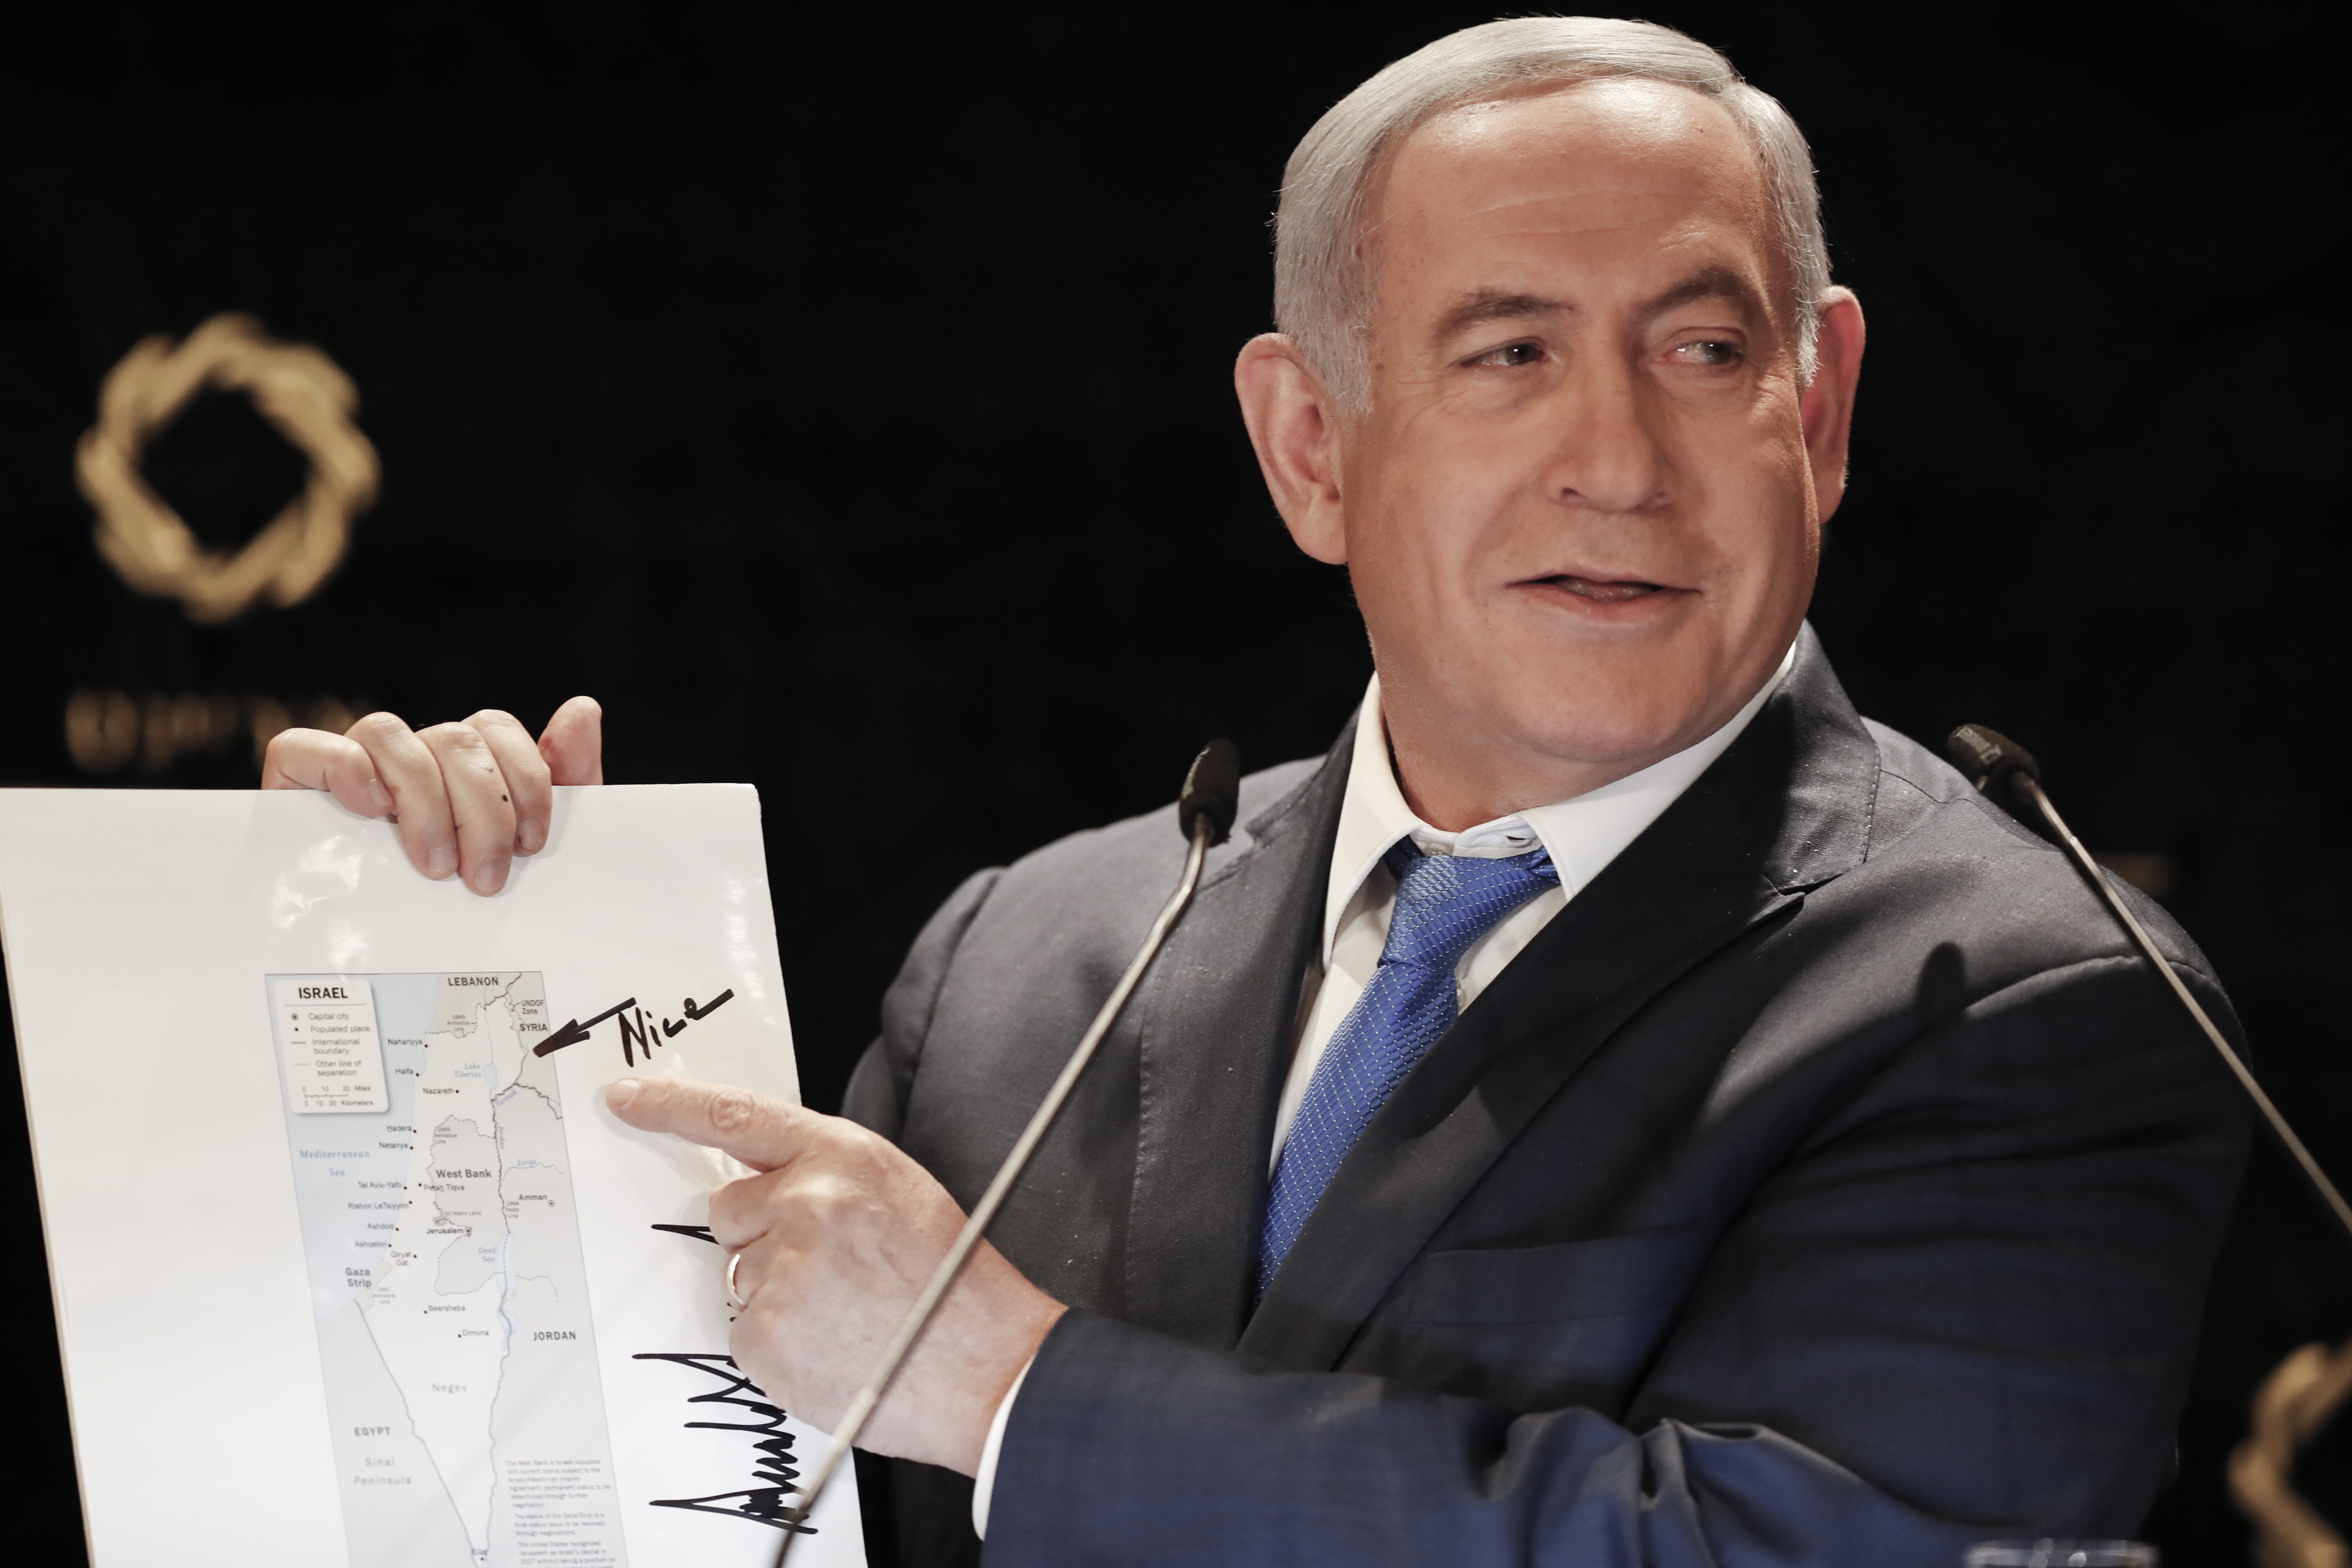 epa07613282 Israeli Prime Minister Benjamin Netanyahu points to the Golan Heights on a map of Israel featuring the signature of US President Donald J. Trump, while delivering a statement to members of the news media in Jerusalem, Israel, 30 May 2019. A visit by Senior Advisor to the White House Jared Kushner, comes one day after the Israeli parliament dissolved itself after Netanyahu failed to form a government coalition. The visit is also shortly ahead of Israeli-Palestinian peace plan talks scheduled in Manama.  EPA/ATEF SAFADI